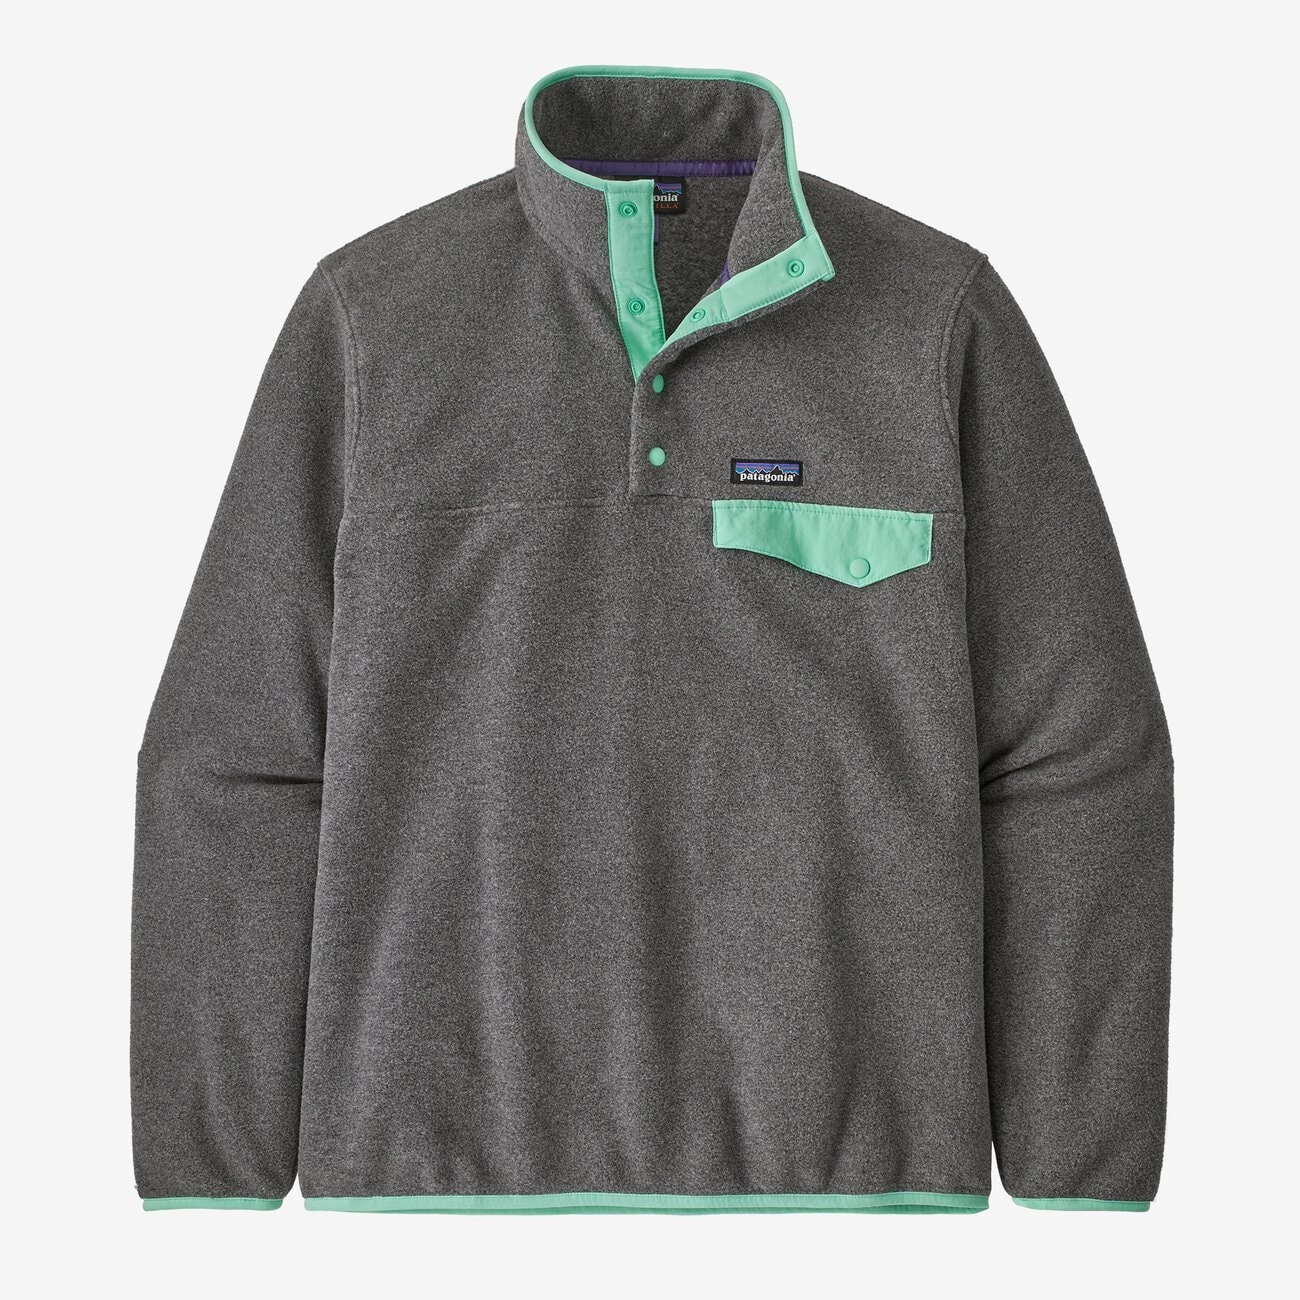 Patagonia Men's LightWeight Synchilla Snap-T PullOver